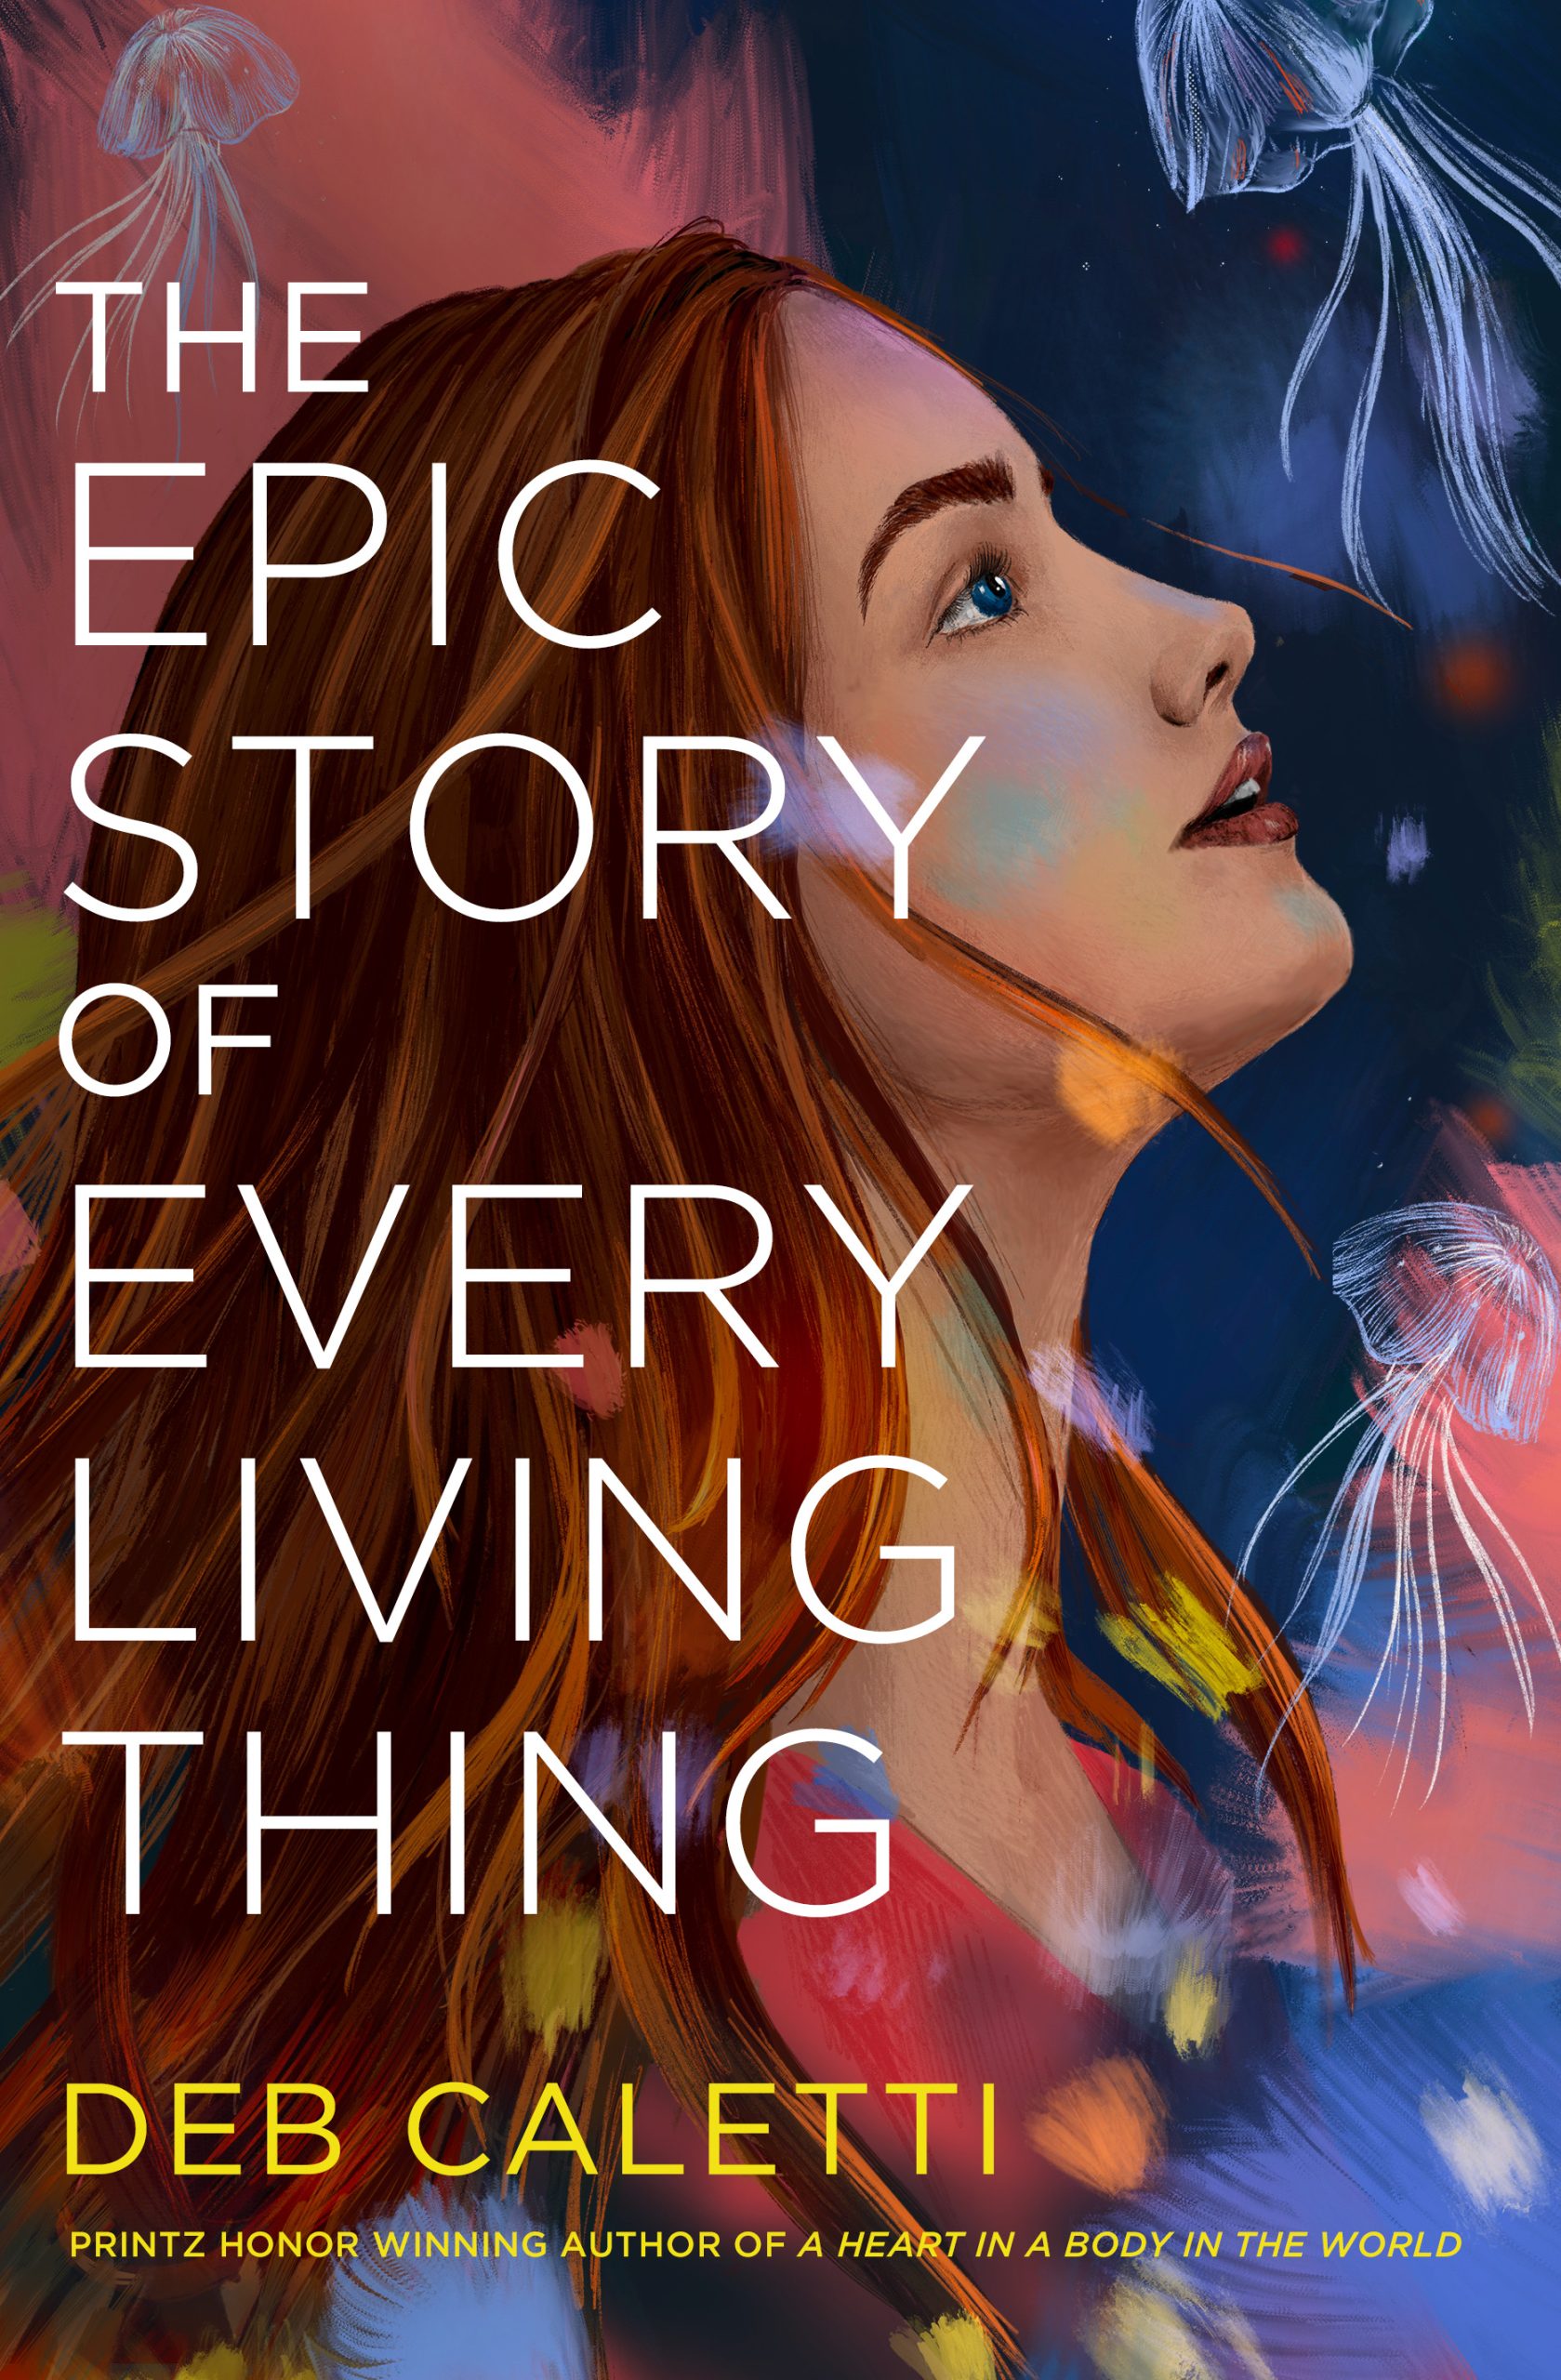 Author Chat with Deb Caletti (The Epic Story of Every Living Thing) Plus Giveaway! ~ US Only